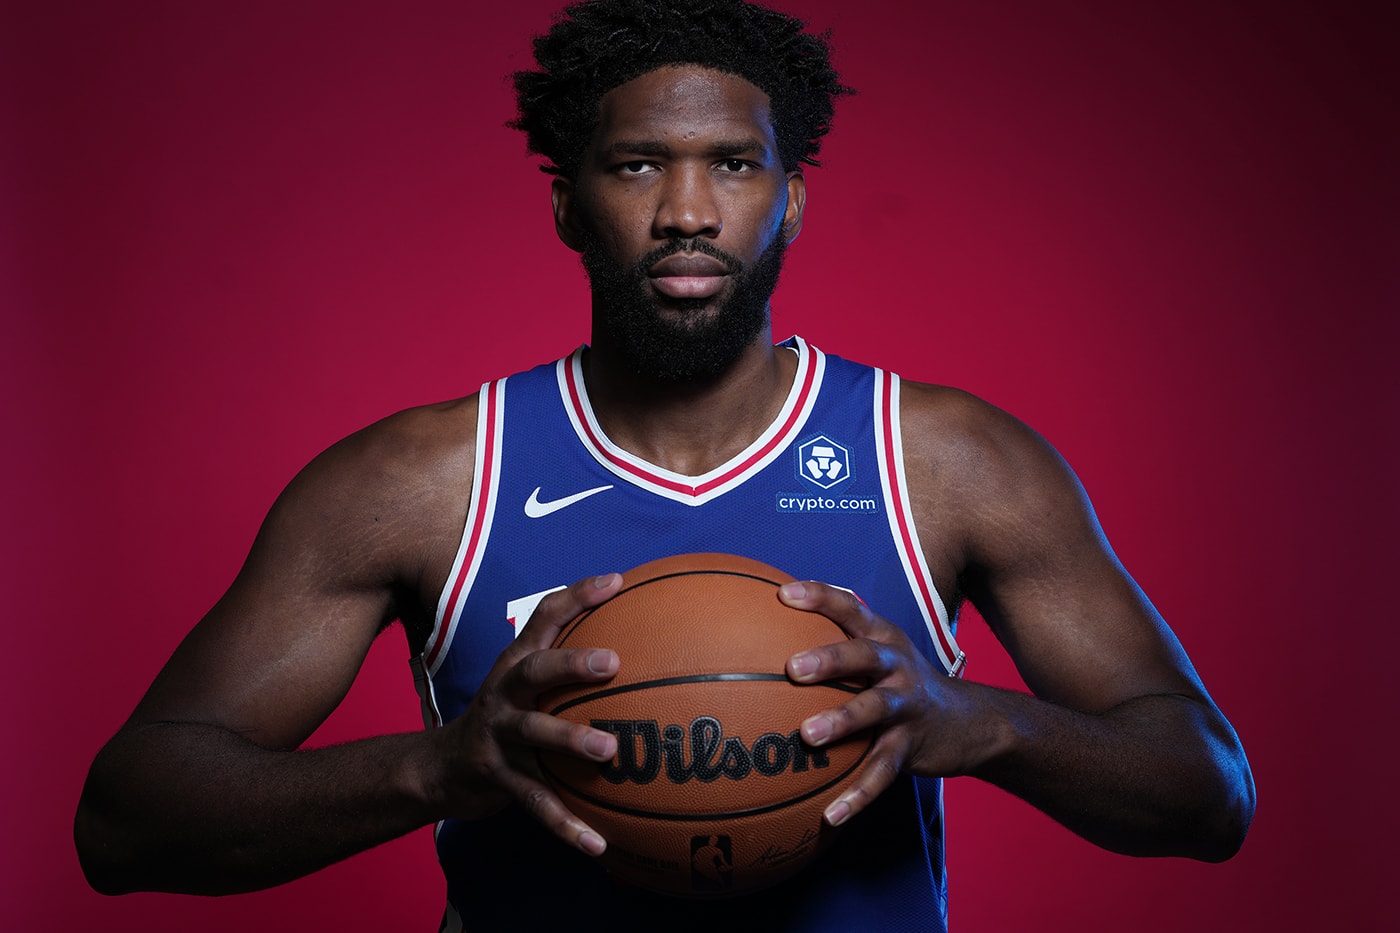 Joel Embiid Will Reportedly Become Skechers' First NBA Athlete